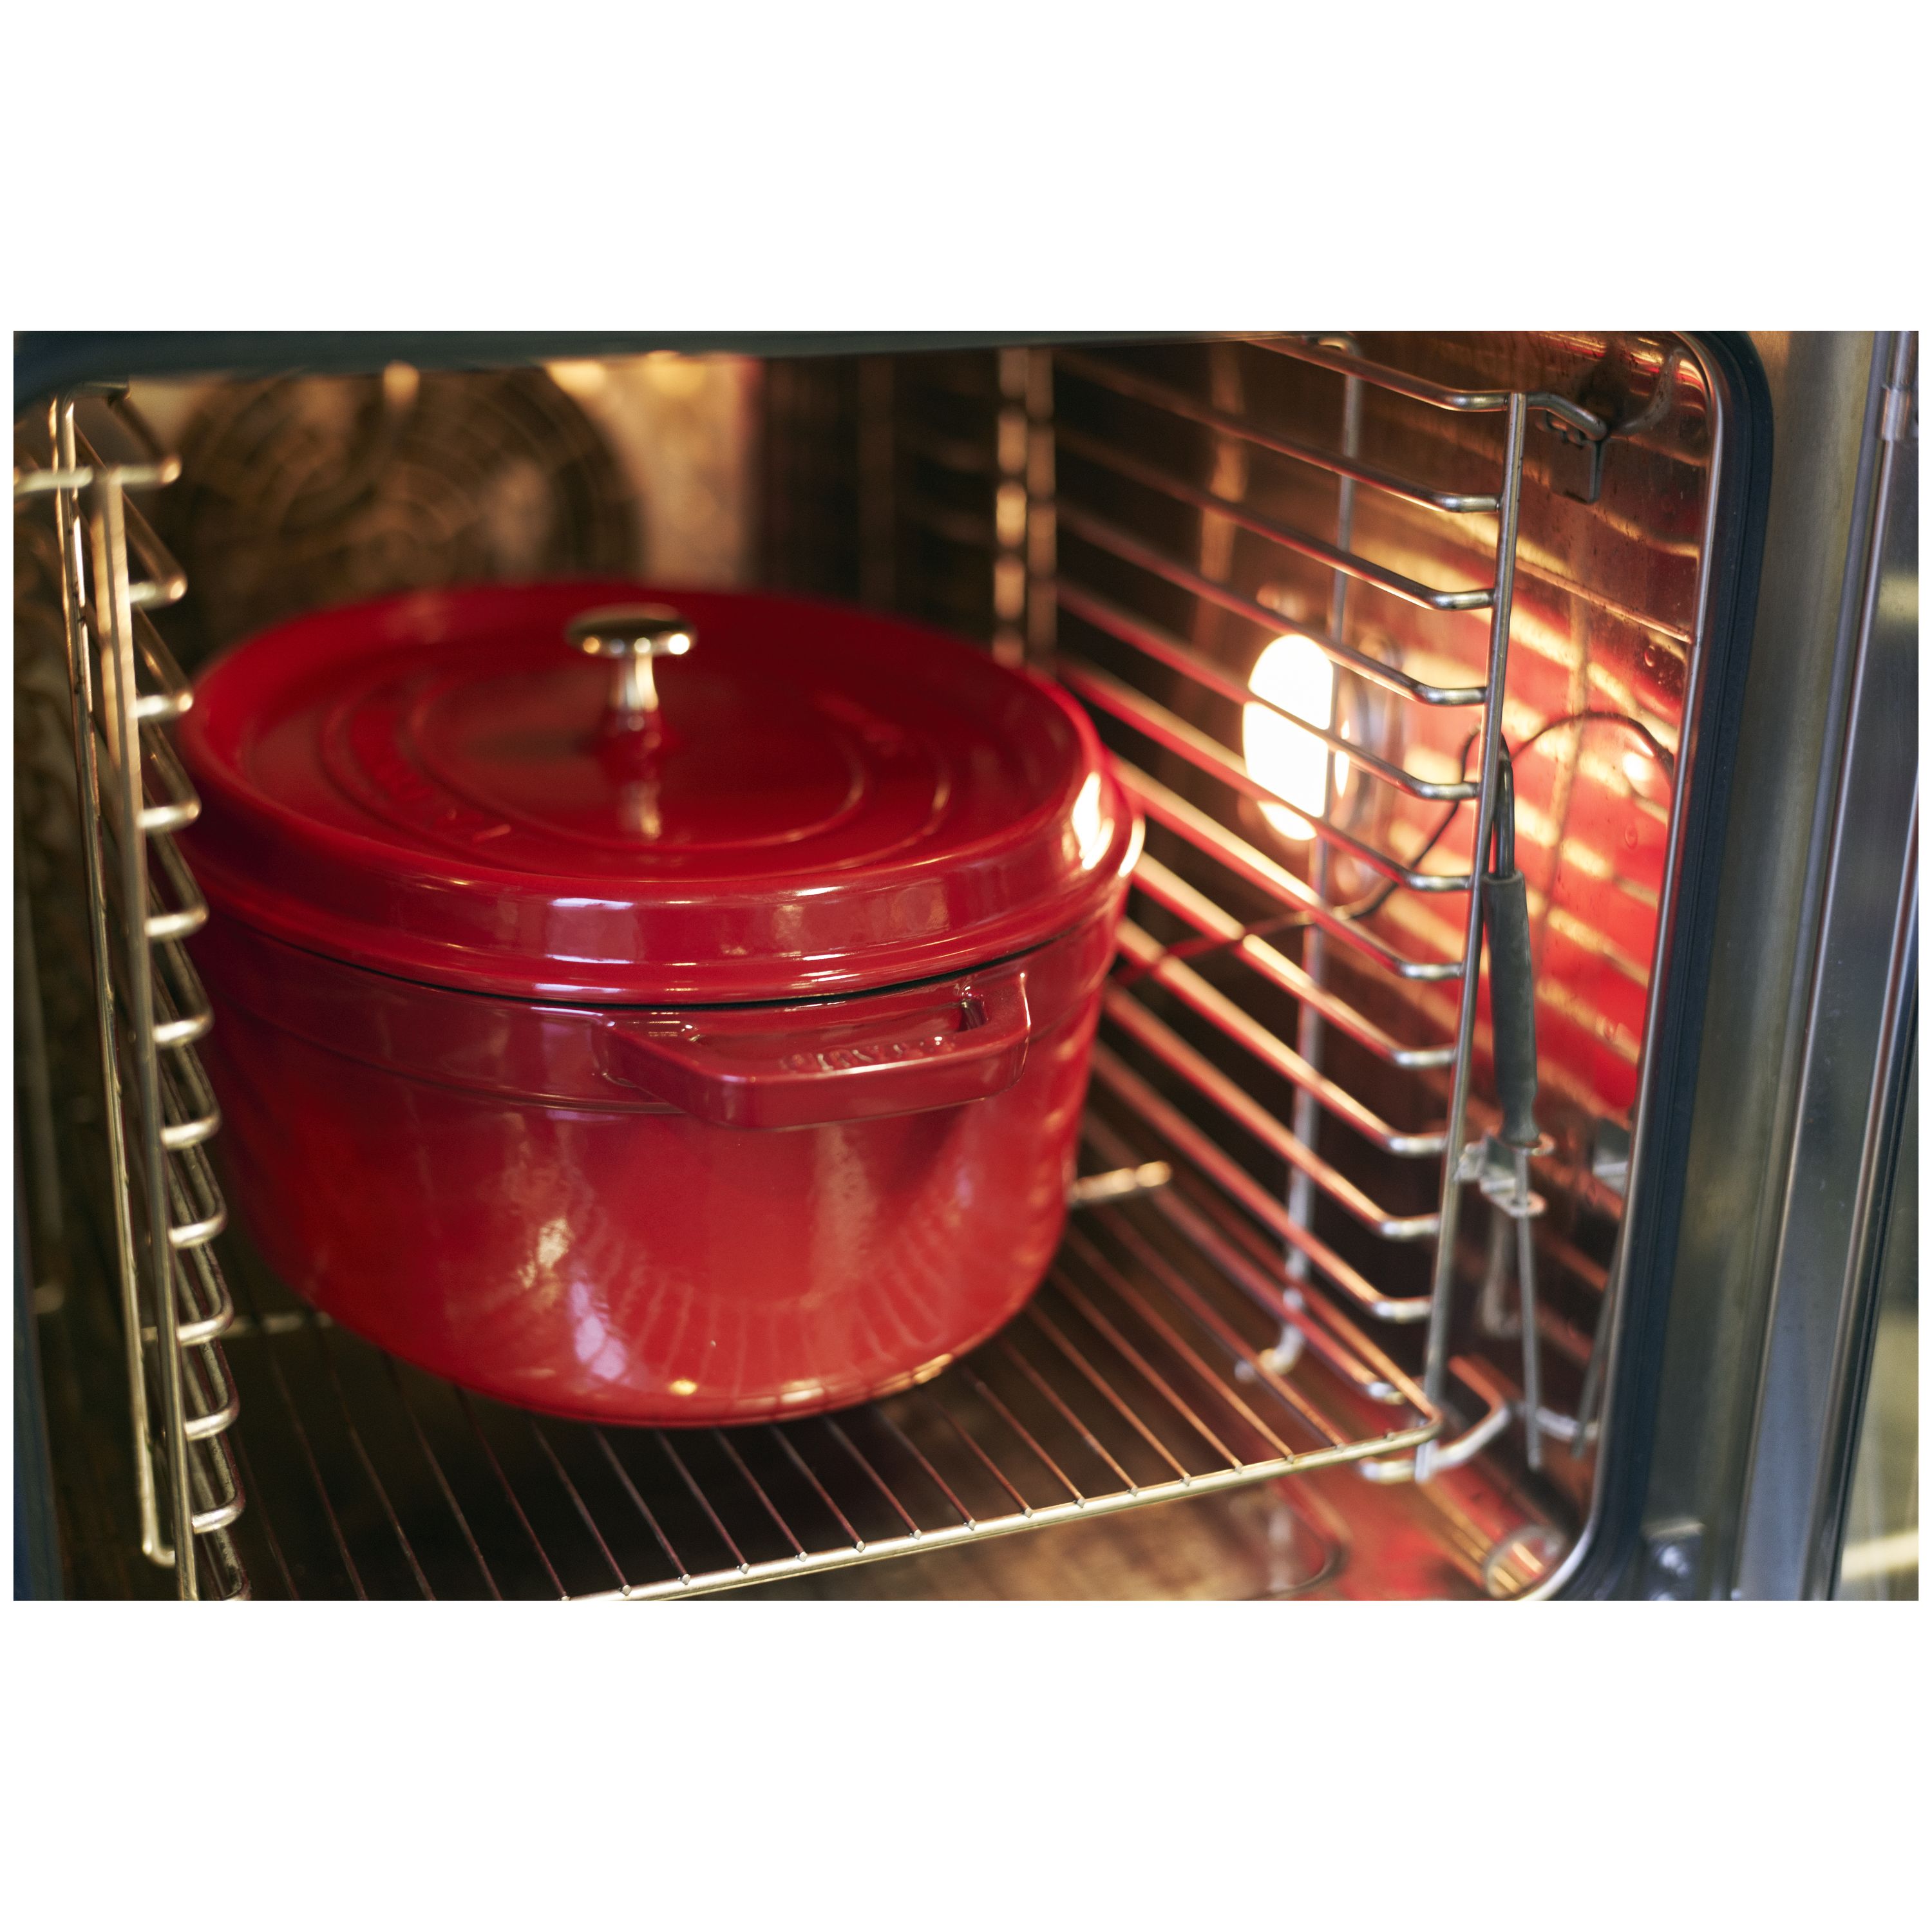  Staub Cast Iron Roaster/Cocotte, Oval 37 cm, 8 L, Cherry Red:  Dutch Ovens: Home & Kitchen